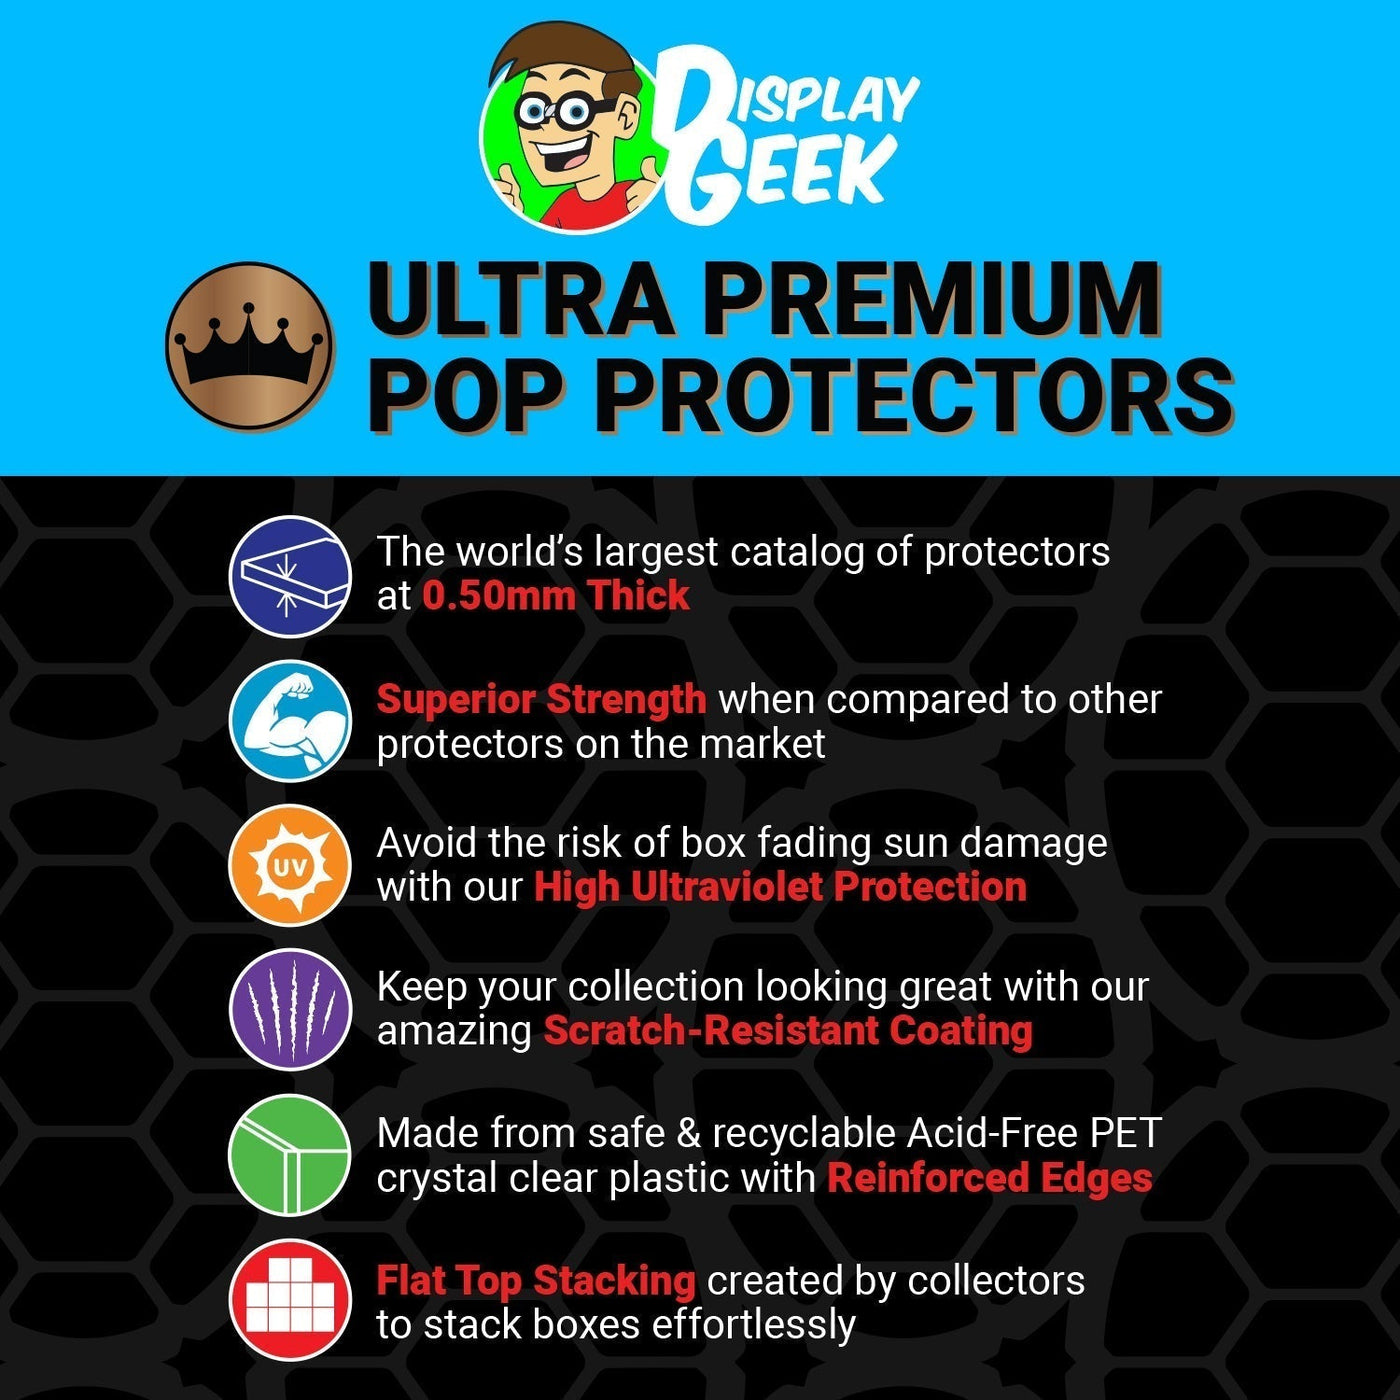 Pop Protector for Guardians Ship Drax in Benatar #1023 Funko Pop Deluxe on The Protector Guide App by Display Geek